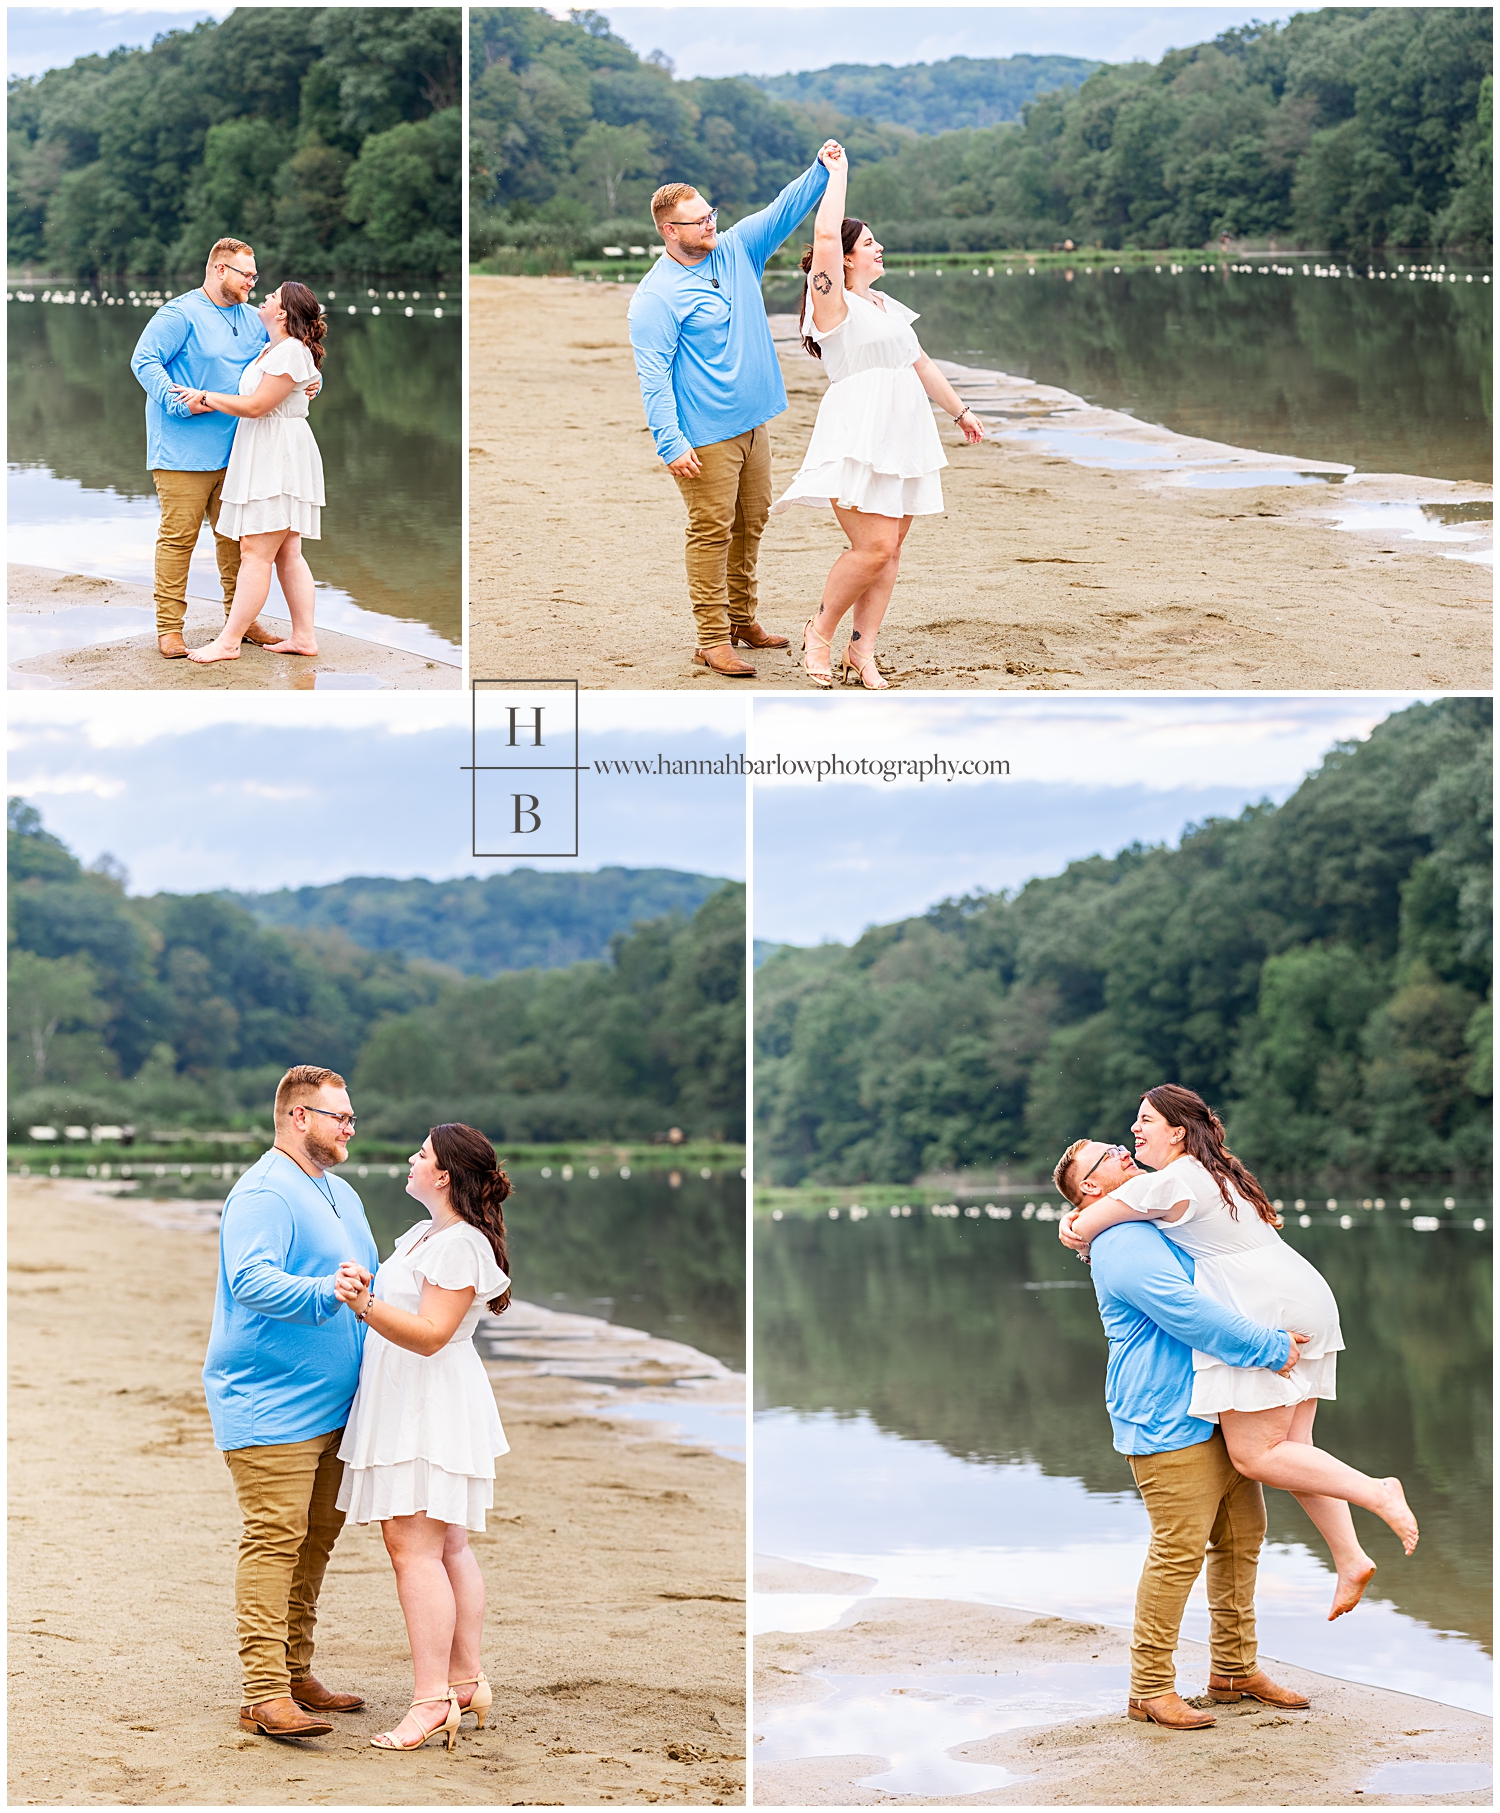 Man in blue shirt dances and lifts fiancé in the air for engagement photos.